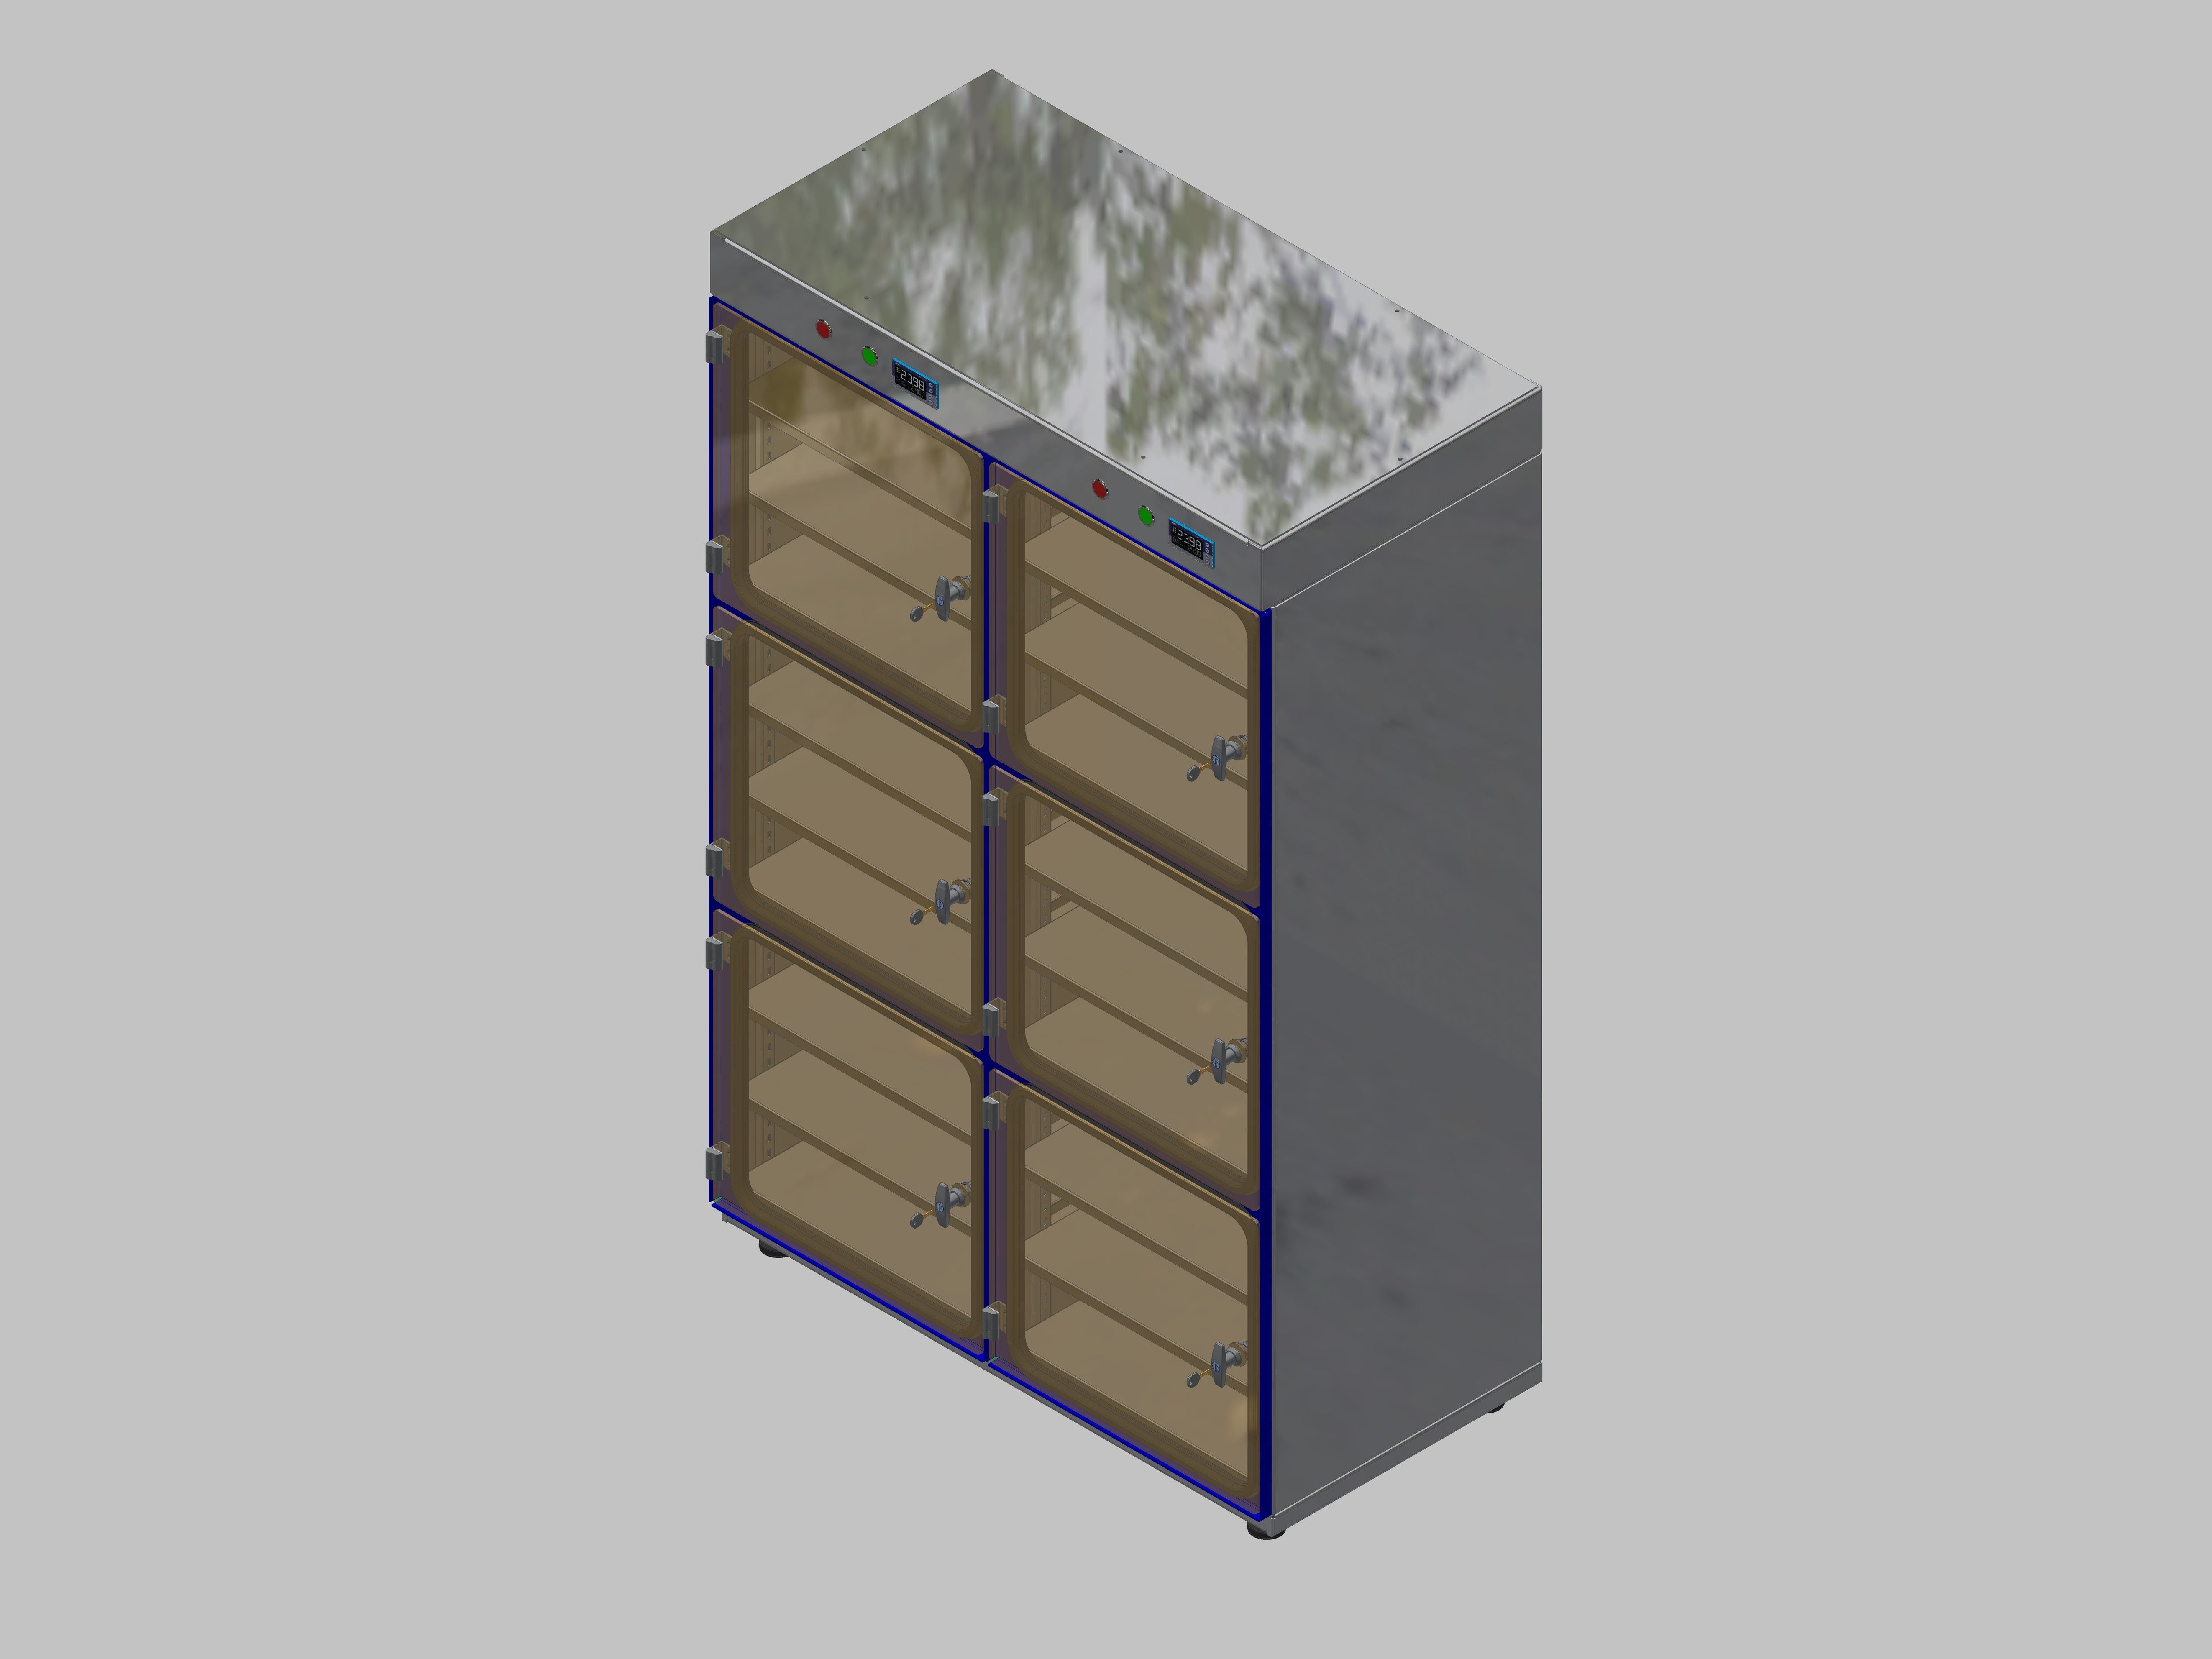 Dry storage cabinet-ITN-1200-6 with 3 shelves per compartment and base design with adjustable feet